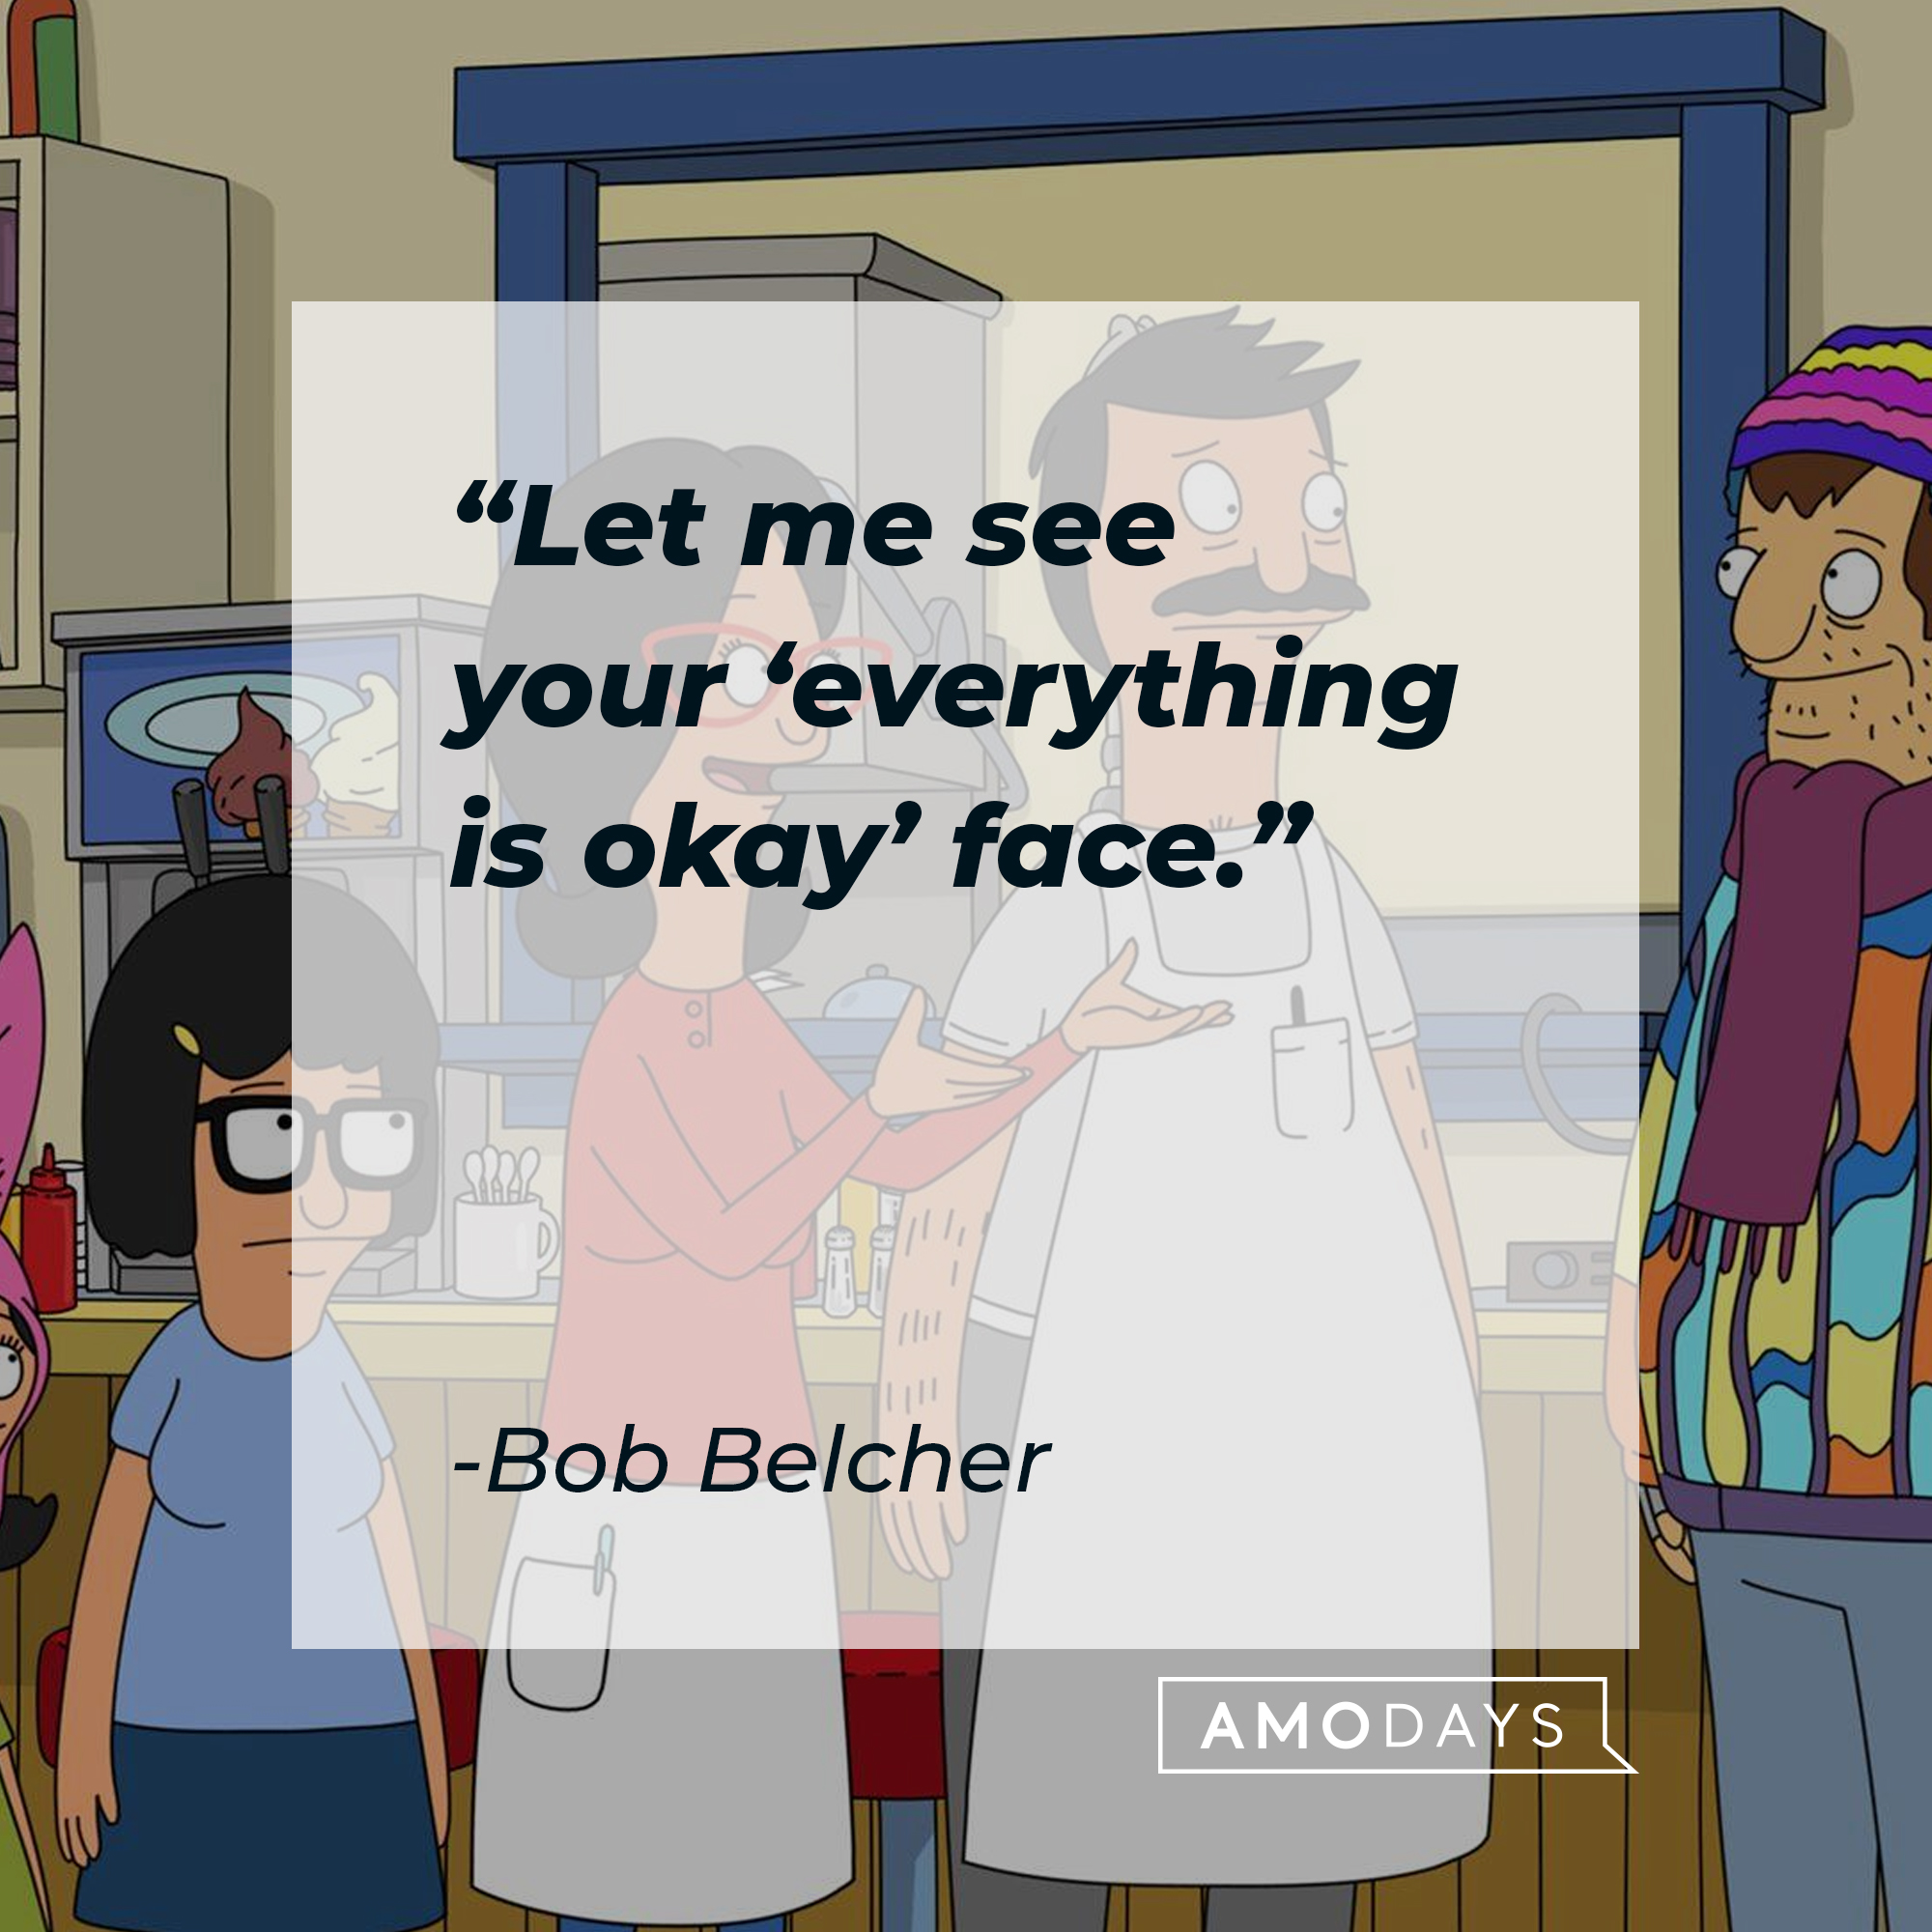 Bob’s quote: “Let me see your ‘everything is okay’ face.” | Source: Facebook.com/BobsBurger